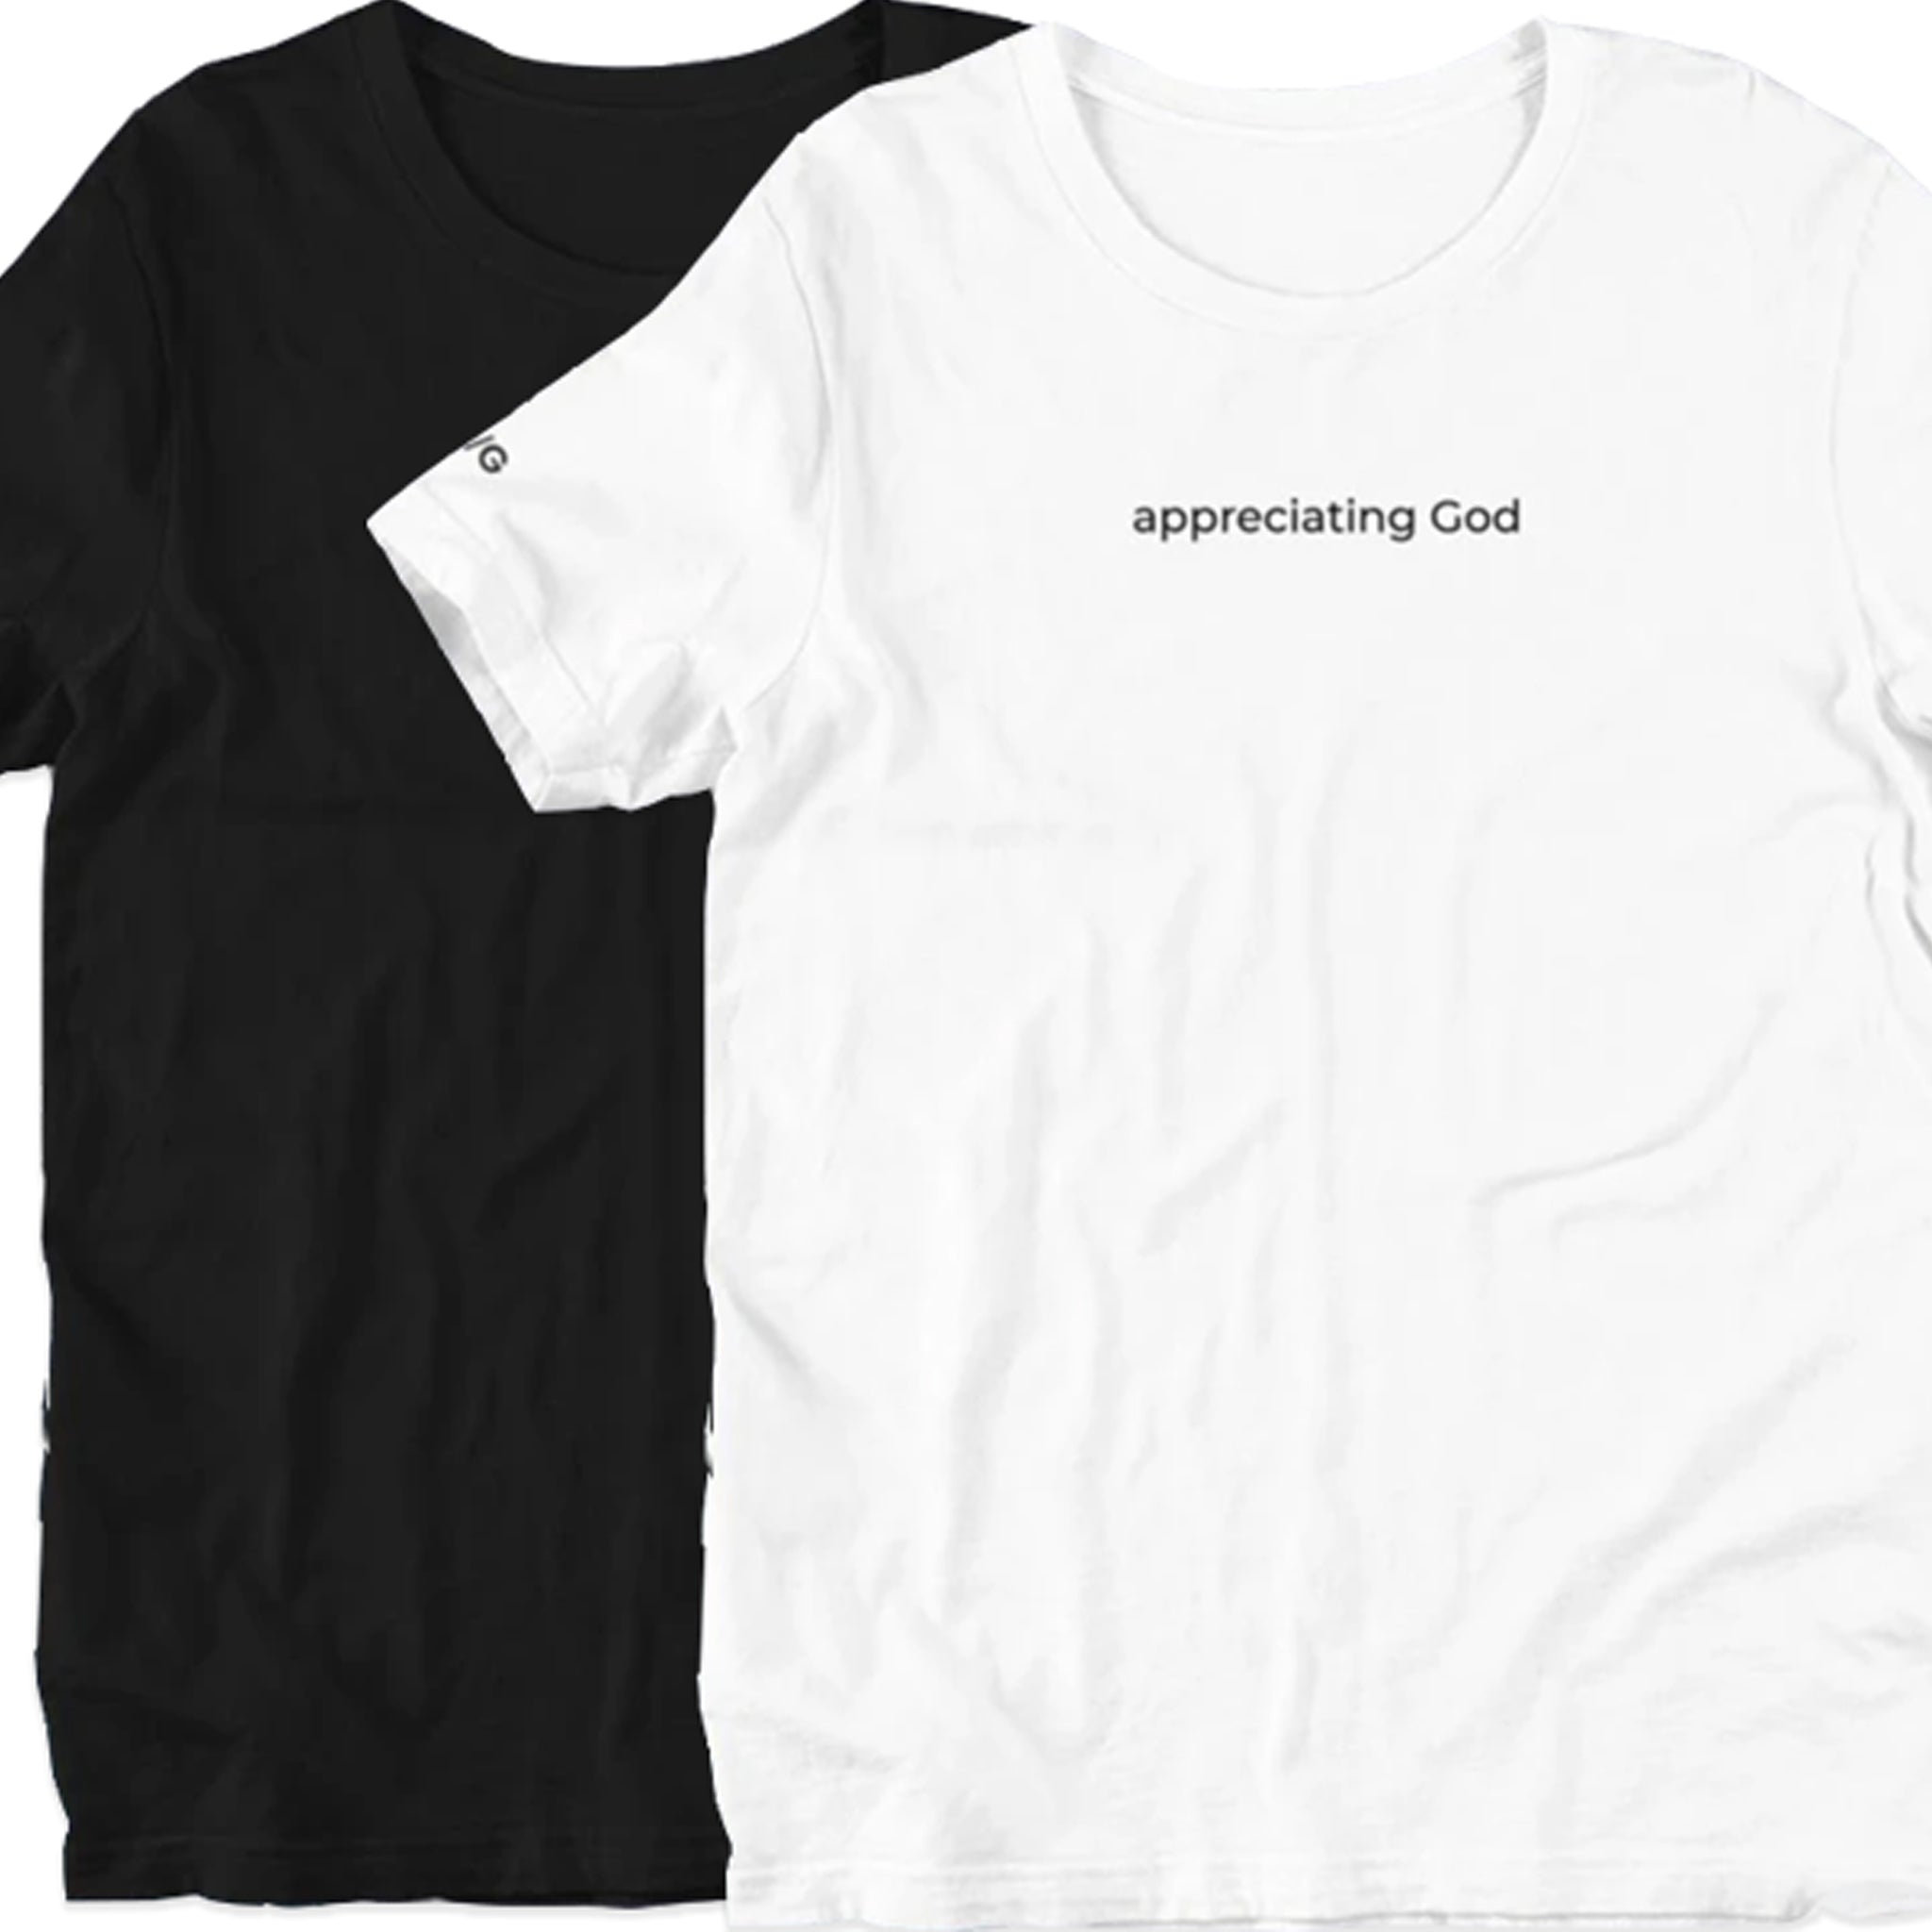 Appreciating God Black and White T-Shirt - Design with God